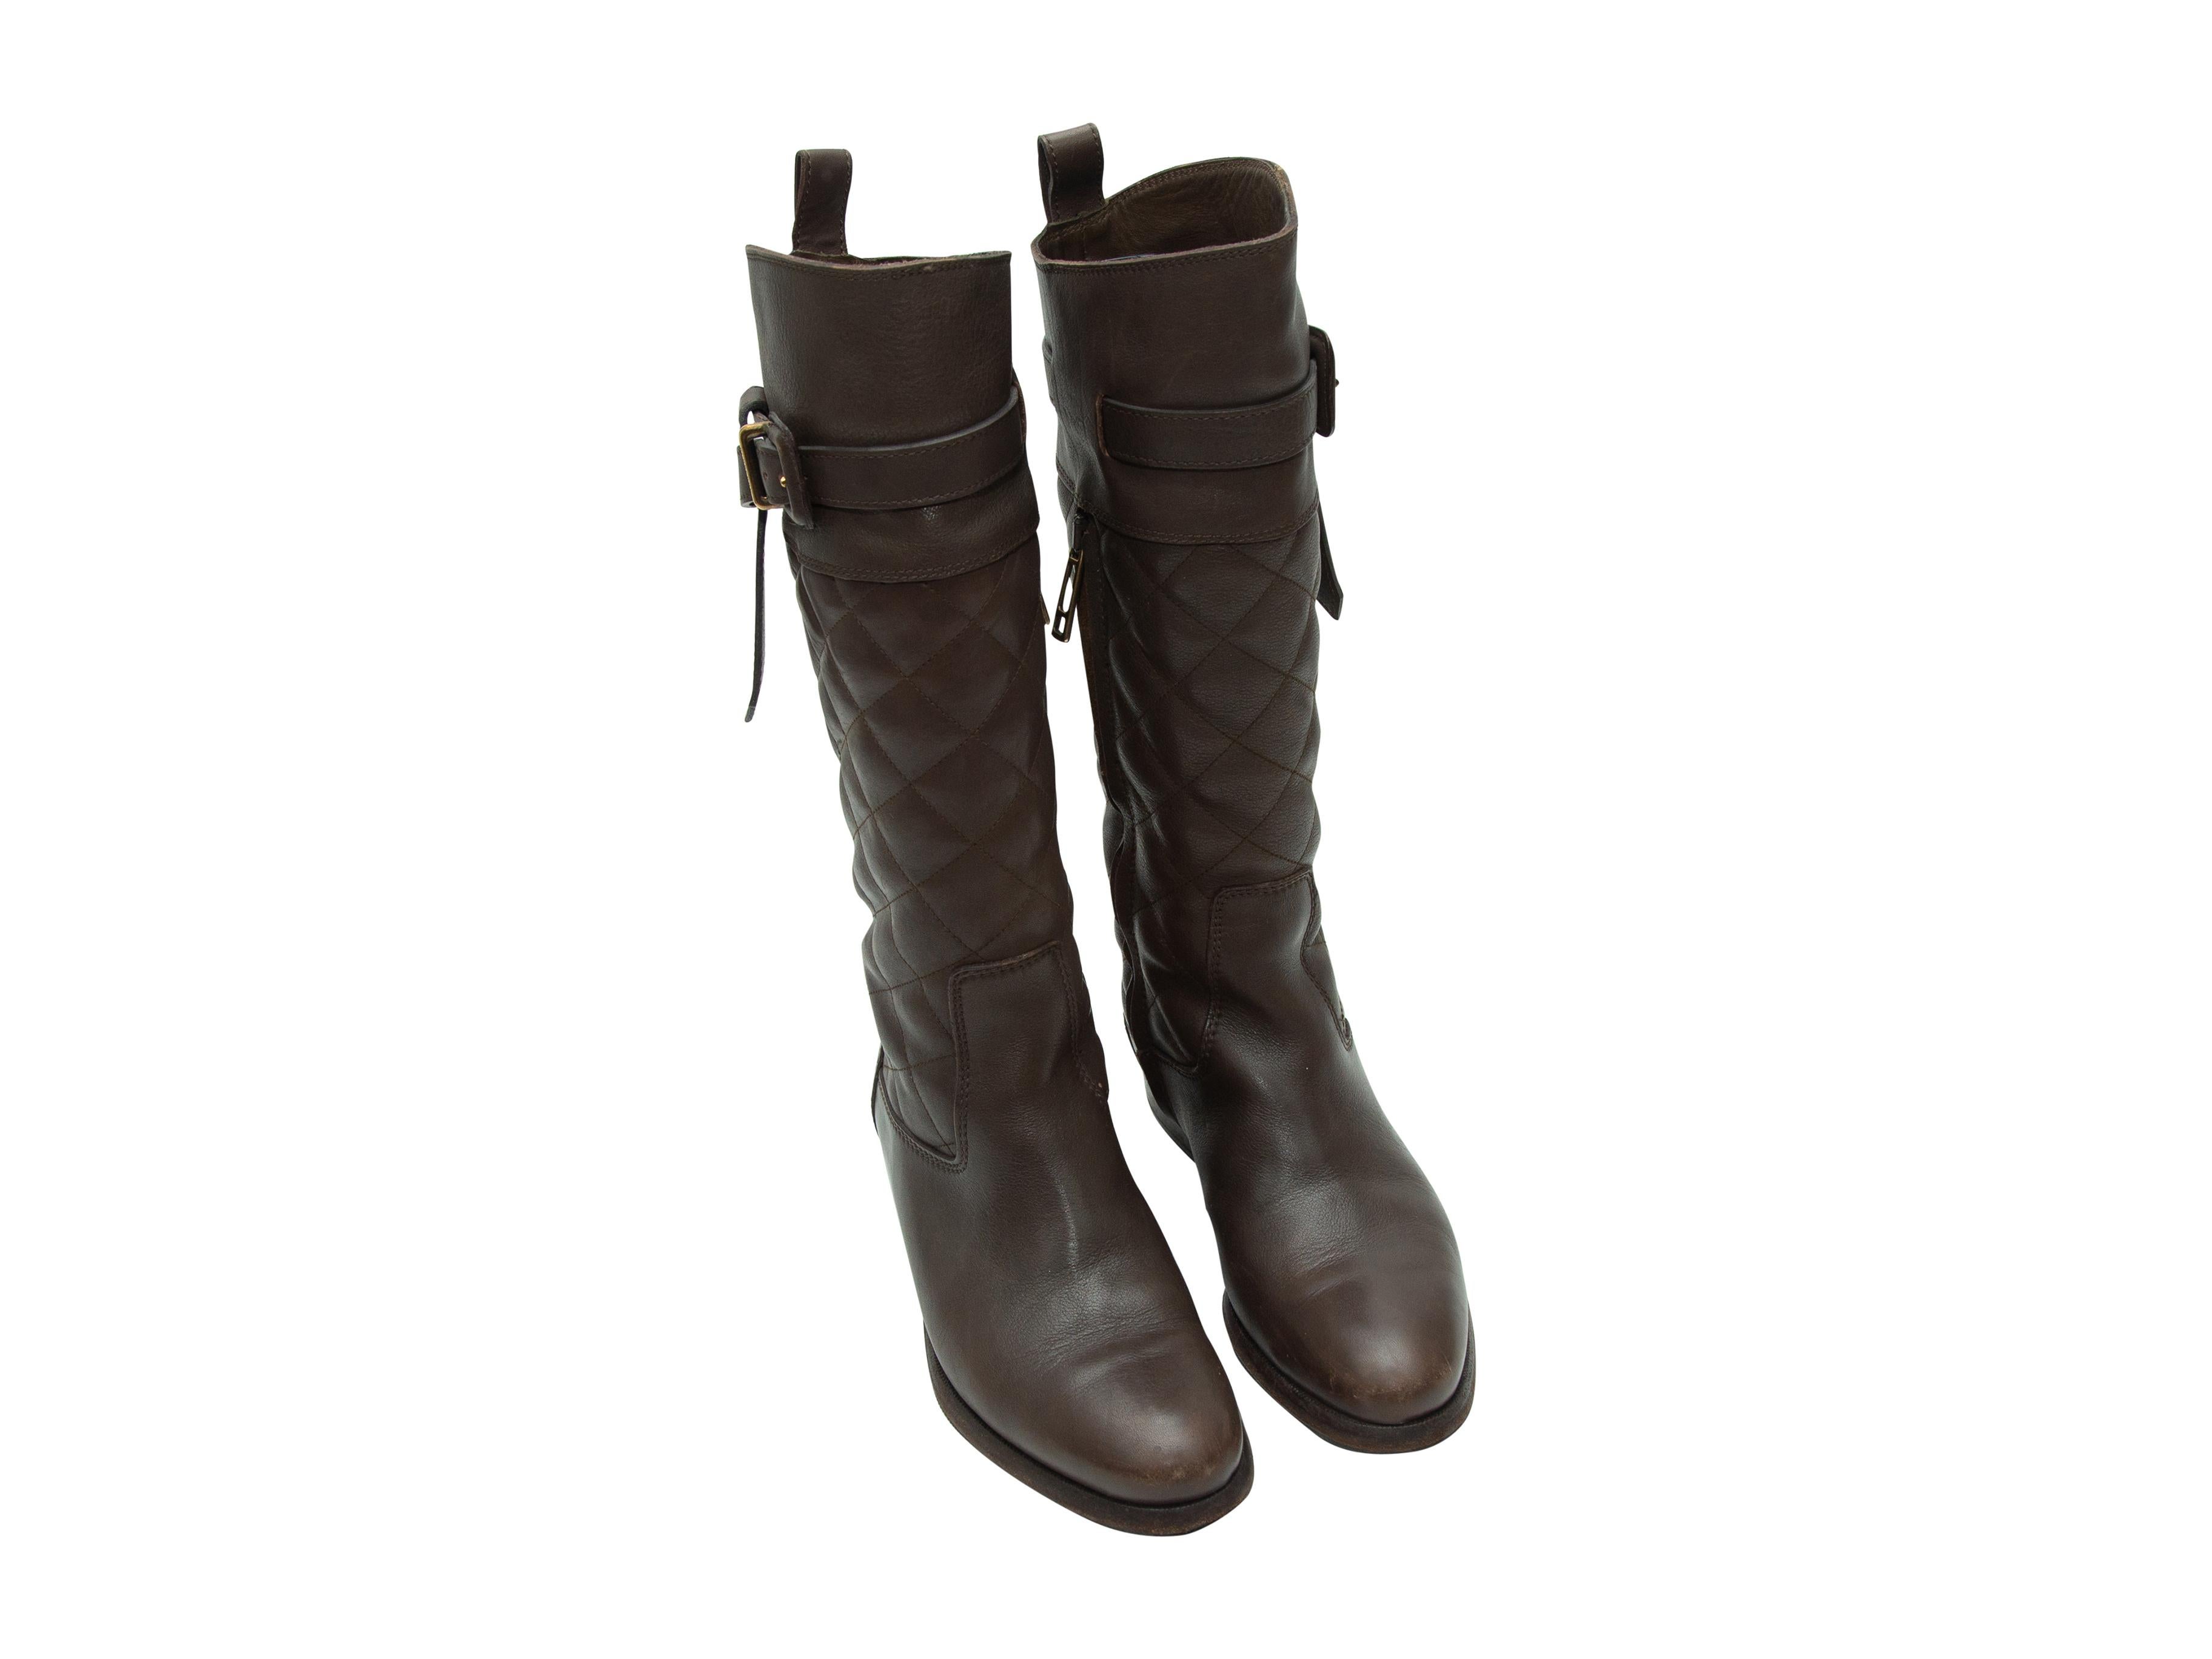 Product details: Dark brown quilted leather tall boots by Burberry. Gold-tone buckle accents at tops. Stacked heels. Zip closures at inner sides. Designer size 36. 1